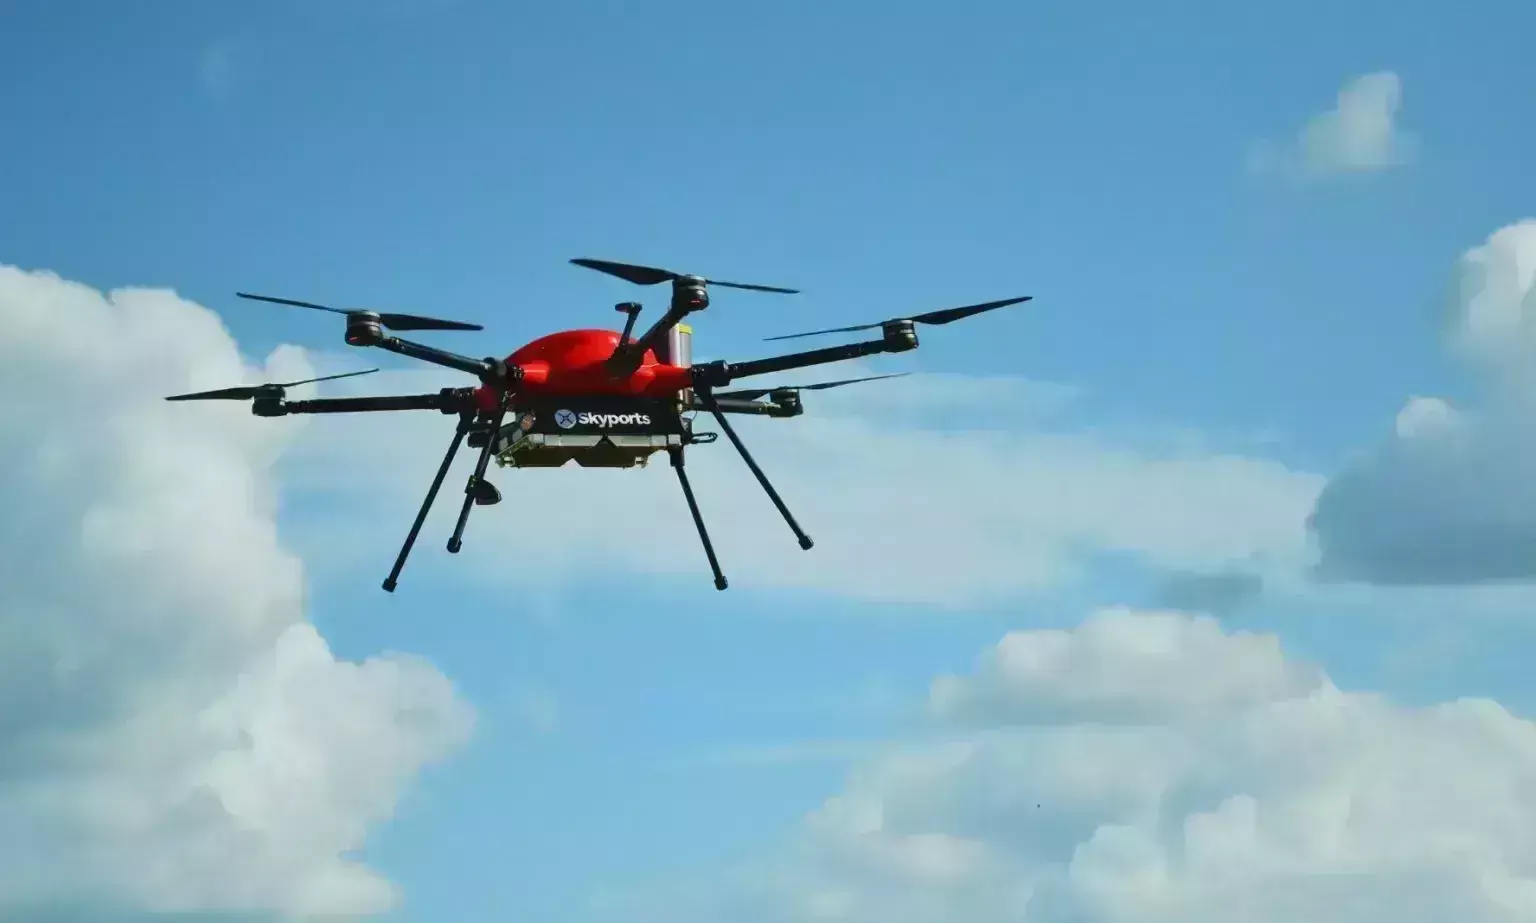 Skyports Drone introduces new aircraft for Royal Mail delivery project